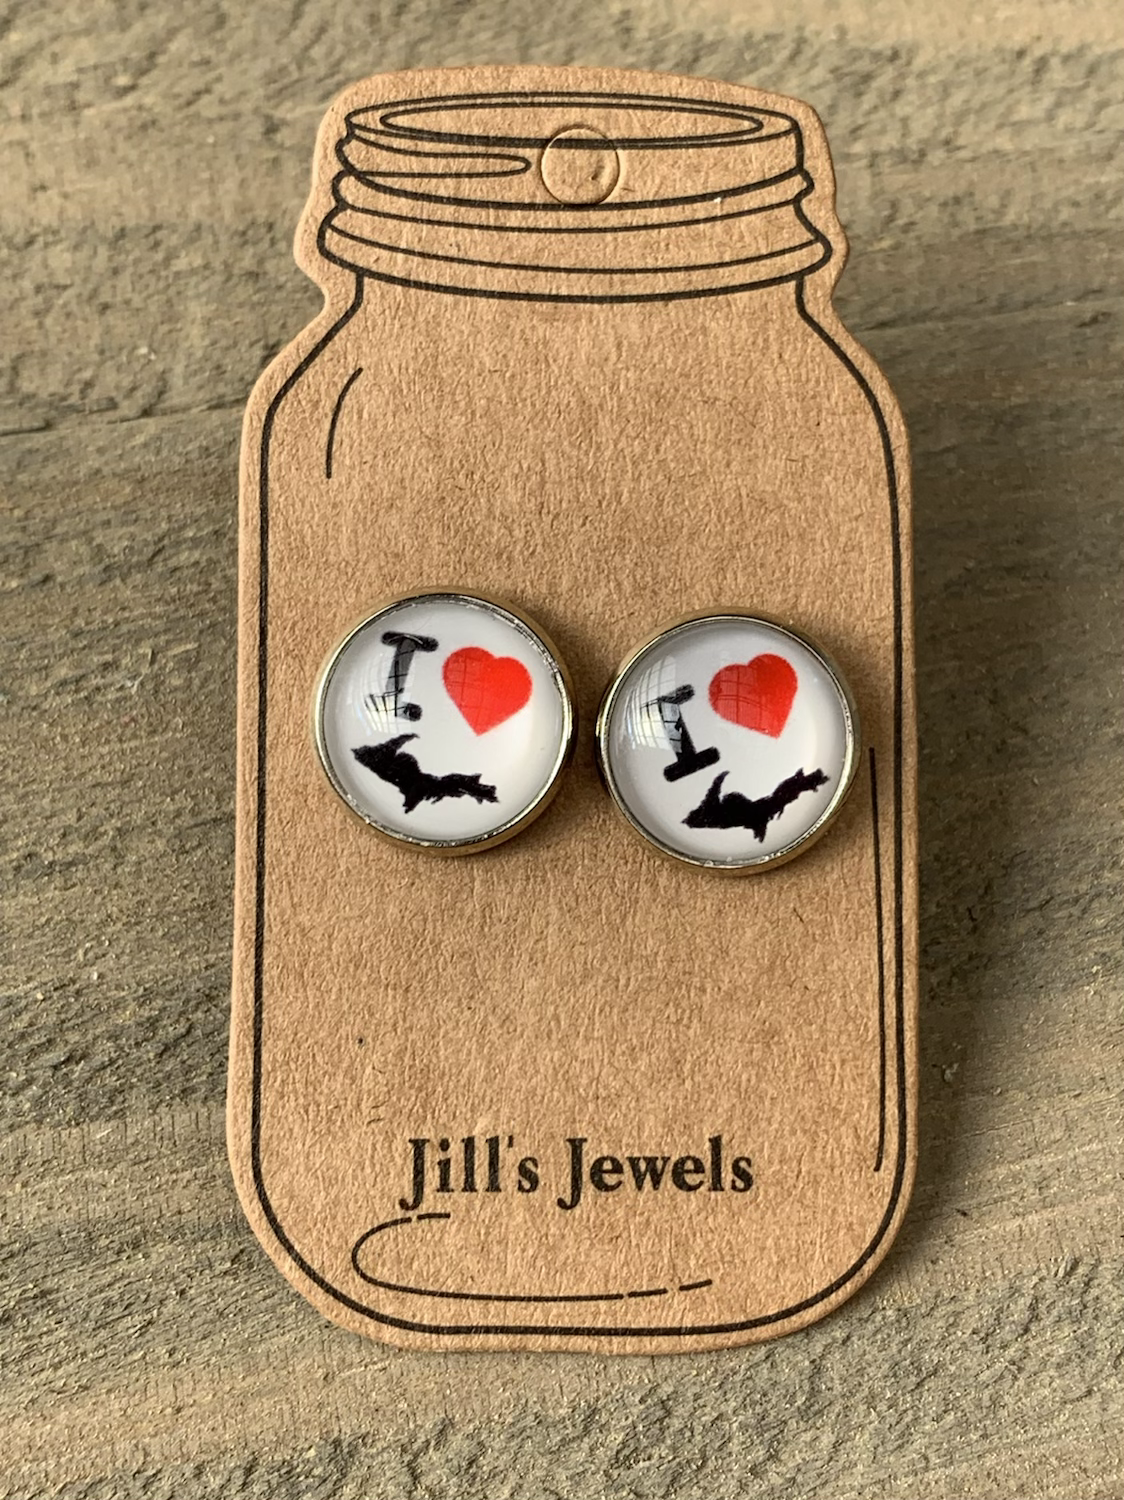 I love the UP Michigan Stud Earrings - Jill's Jewels | Unique, Handcrafted, Trendy, And Fun Jewelry